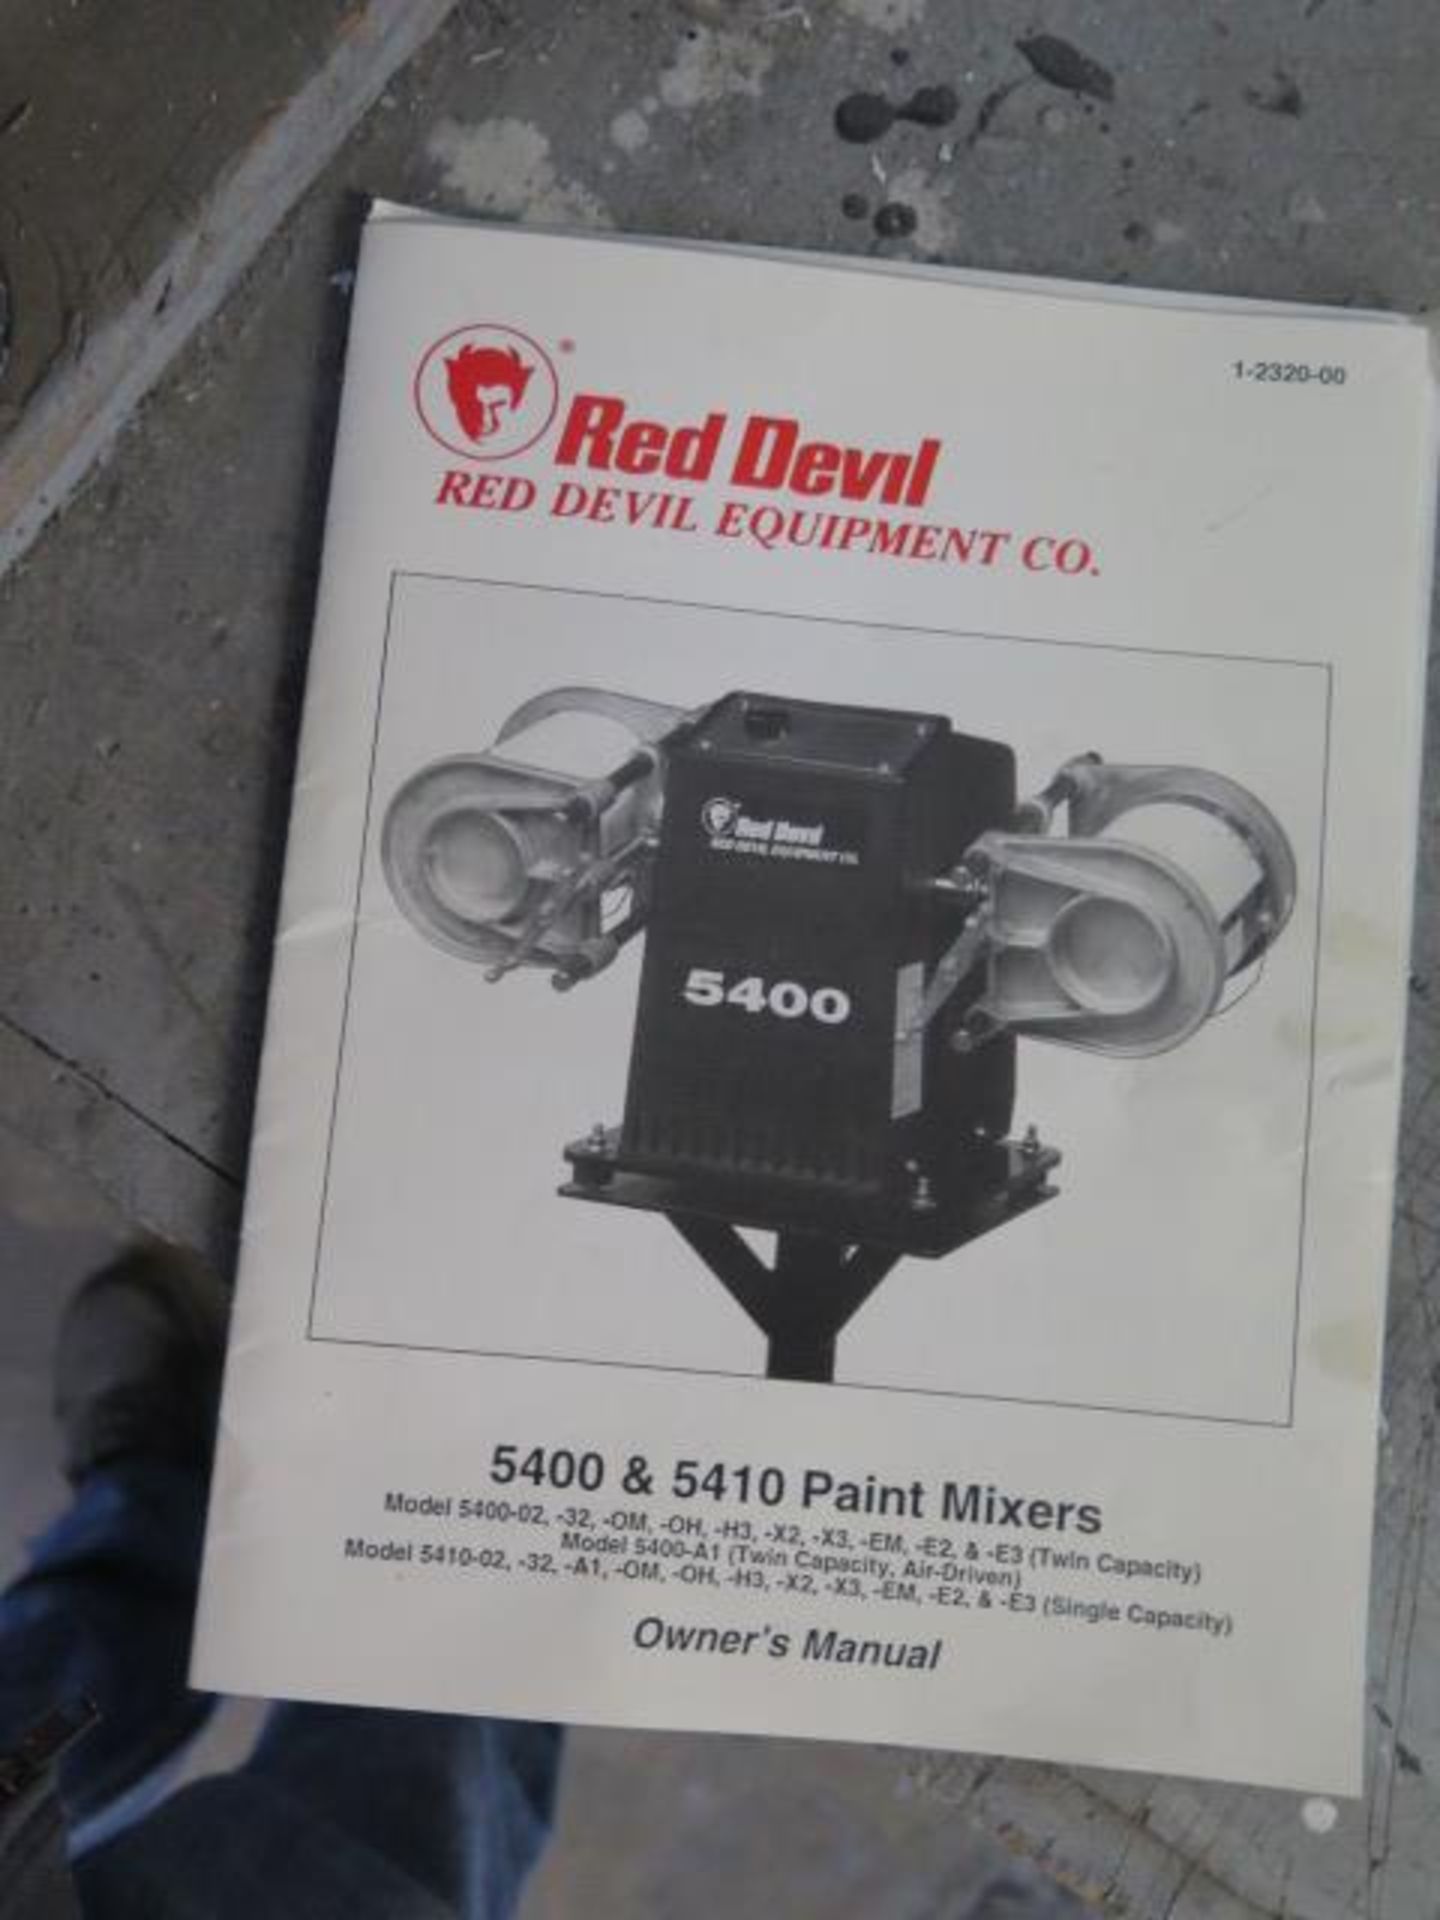 Red Devil mdl. 5400 Paint Shaker (SOLD AS-IS - NO WARRANTY) - Image 7 of 7